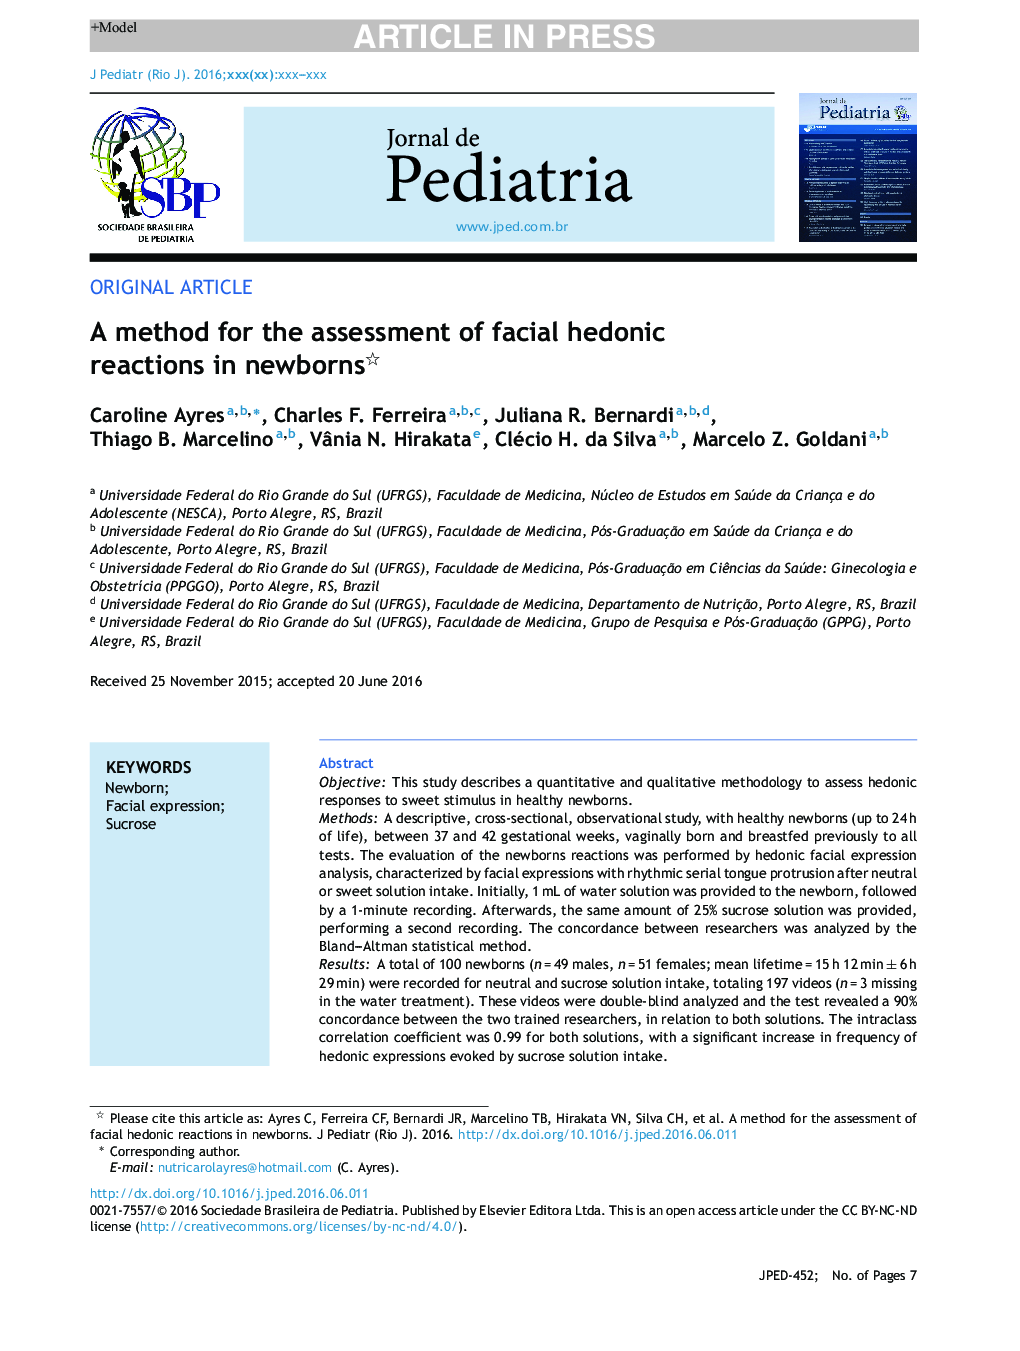 A method for the assessment of facial hedonic reactions in newborns